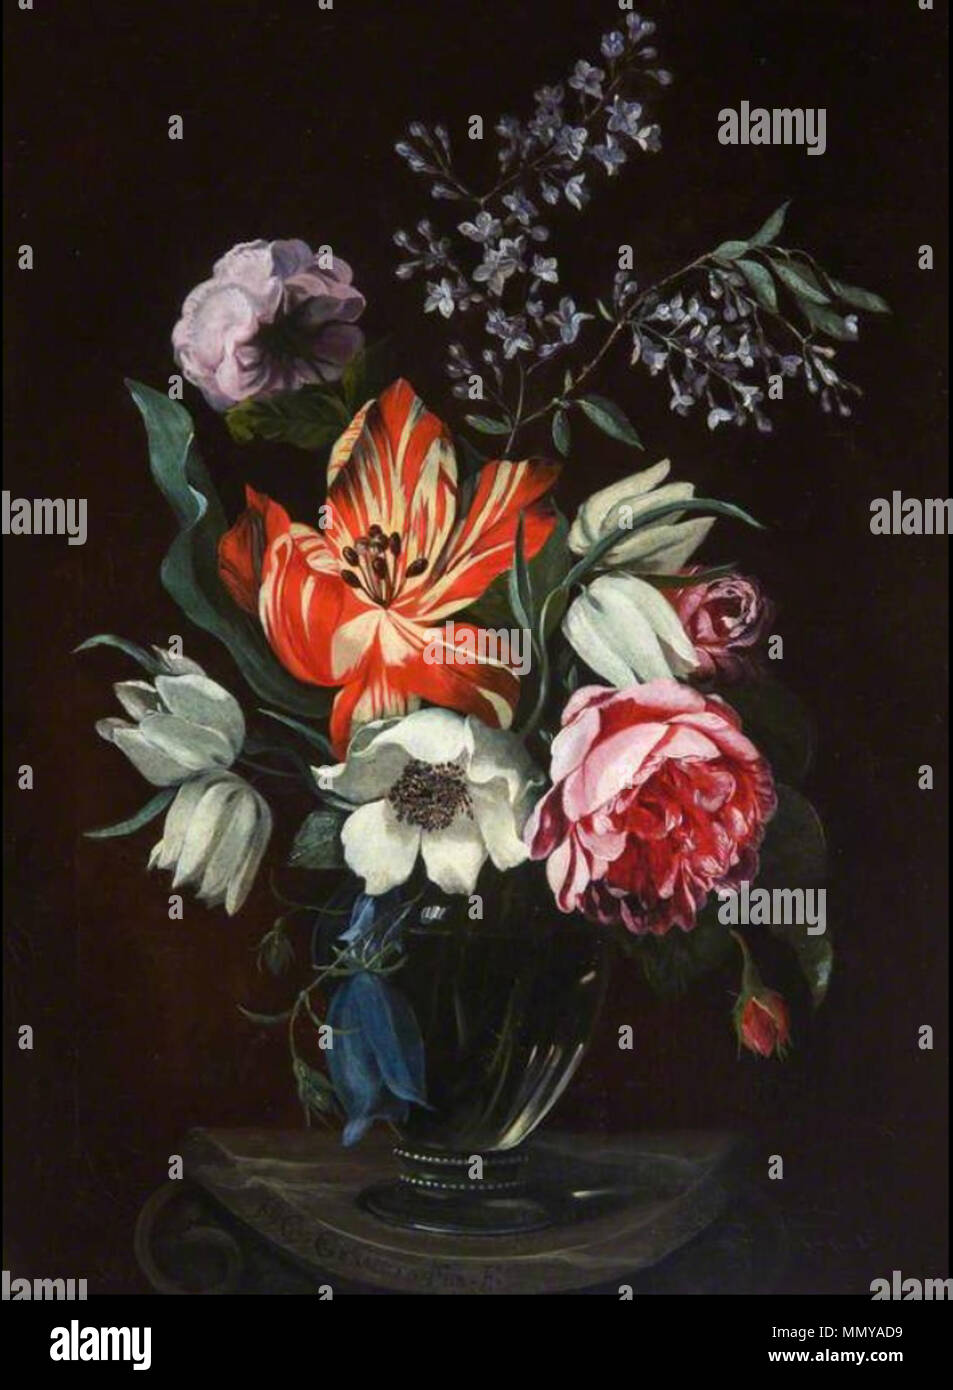 .  English: Tulips, Roses and Other Flowers  . 17th century.   Gualterus Gysaerts  (1649 – after 1677)    Alternative names Gualterus Gijsaerts, Wouter Gijsaerts, Gualterus Gijseerts, Wouter Gijseerts, Wouter Gysaerts, Woutier Gysaerts, Gauthier Gysaerts, Gualterus Gyseerts, Wouter Gyseerts  Description Flemish painter  Date of birth/death 1649 after 1677  Location of birth/death Antwerp Mechelen  Work period from 1662 until 1677  Work location Antwerp (1662-1670), Mechelen (1677)  Authority control  : Q17424967 VIAF:?306063446 ULAN:?500013050 BPN:?34421666 RKD:?34800 Gualterus Gijsaerts - Tul Stock Photo